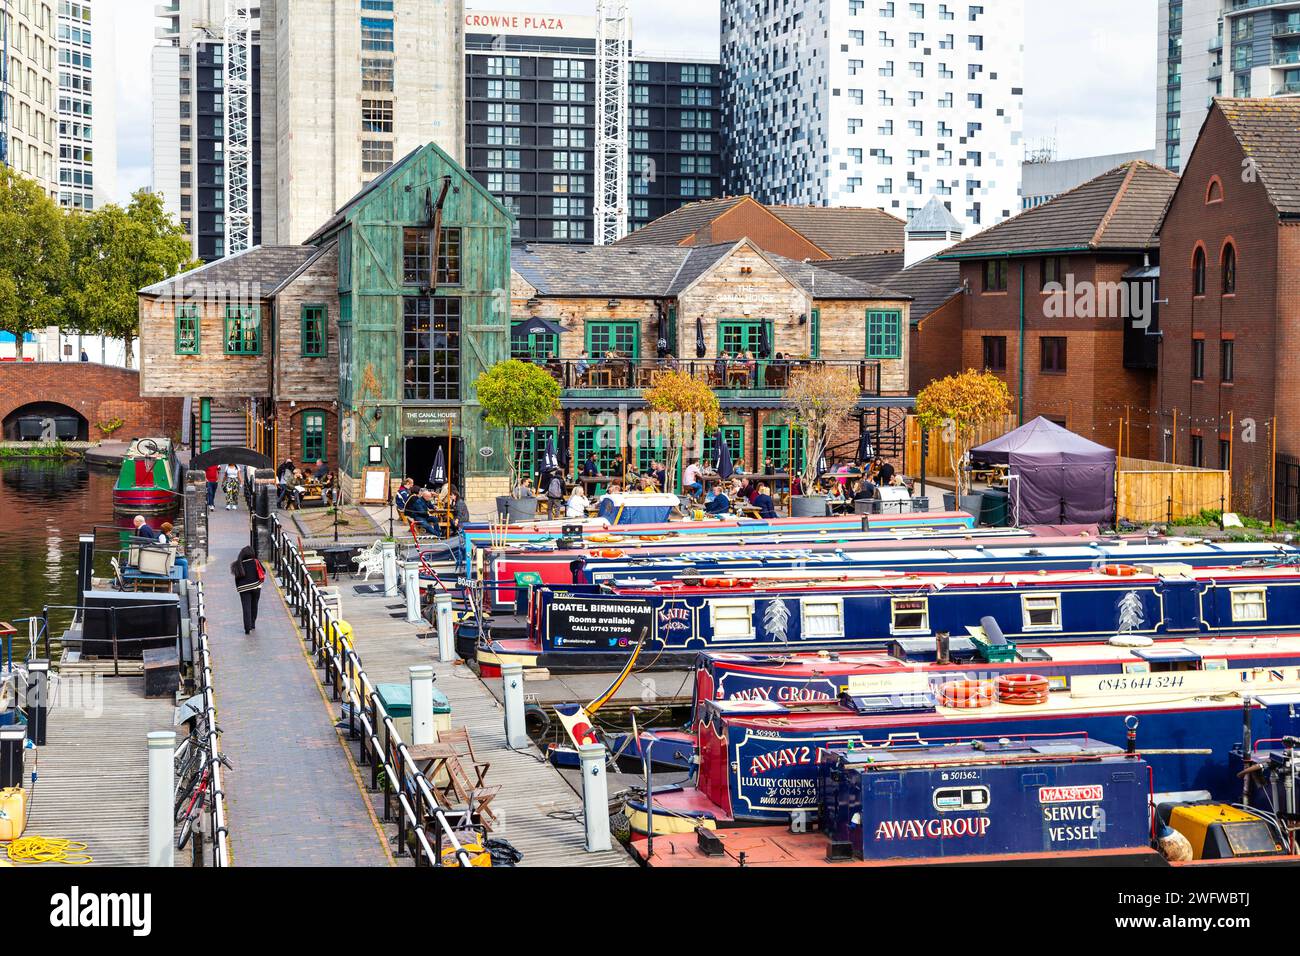 The Canal House pub and Gas Street Basin with moored houseboats, Birmingham, West Midlands, England Stock Photo